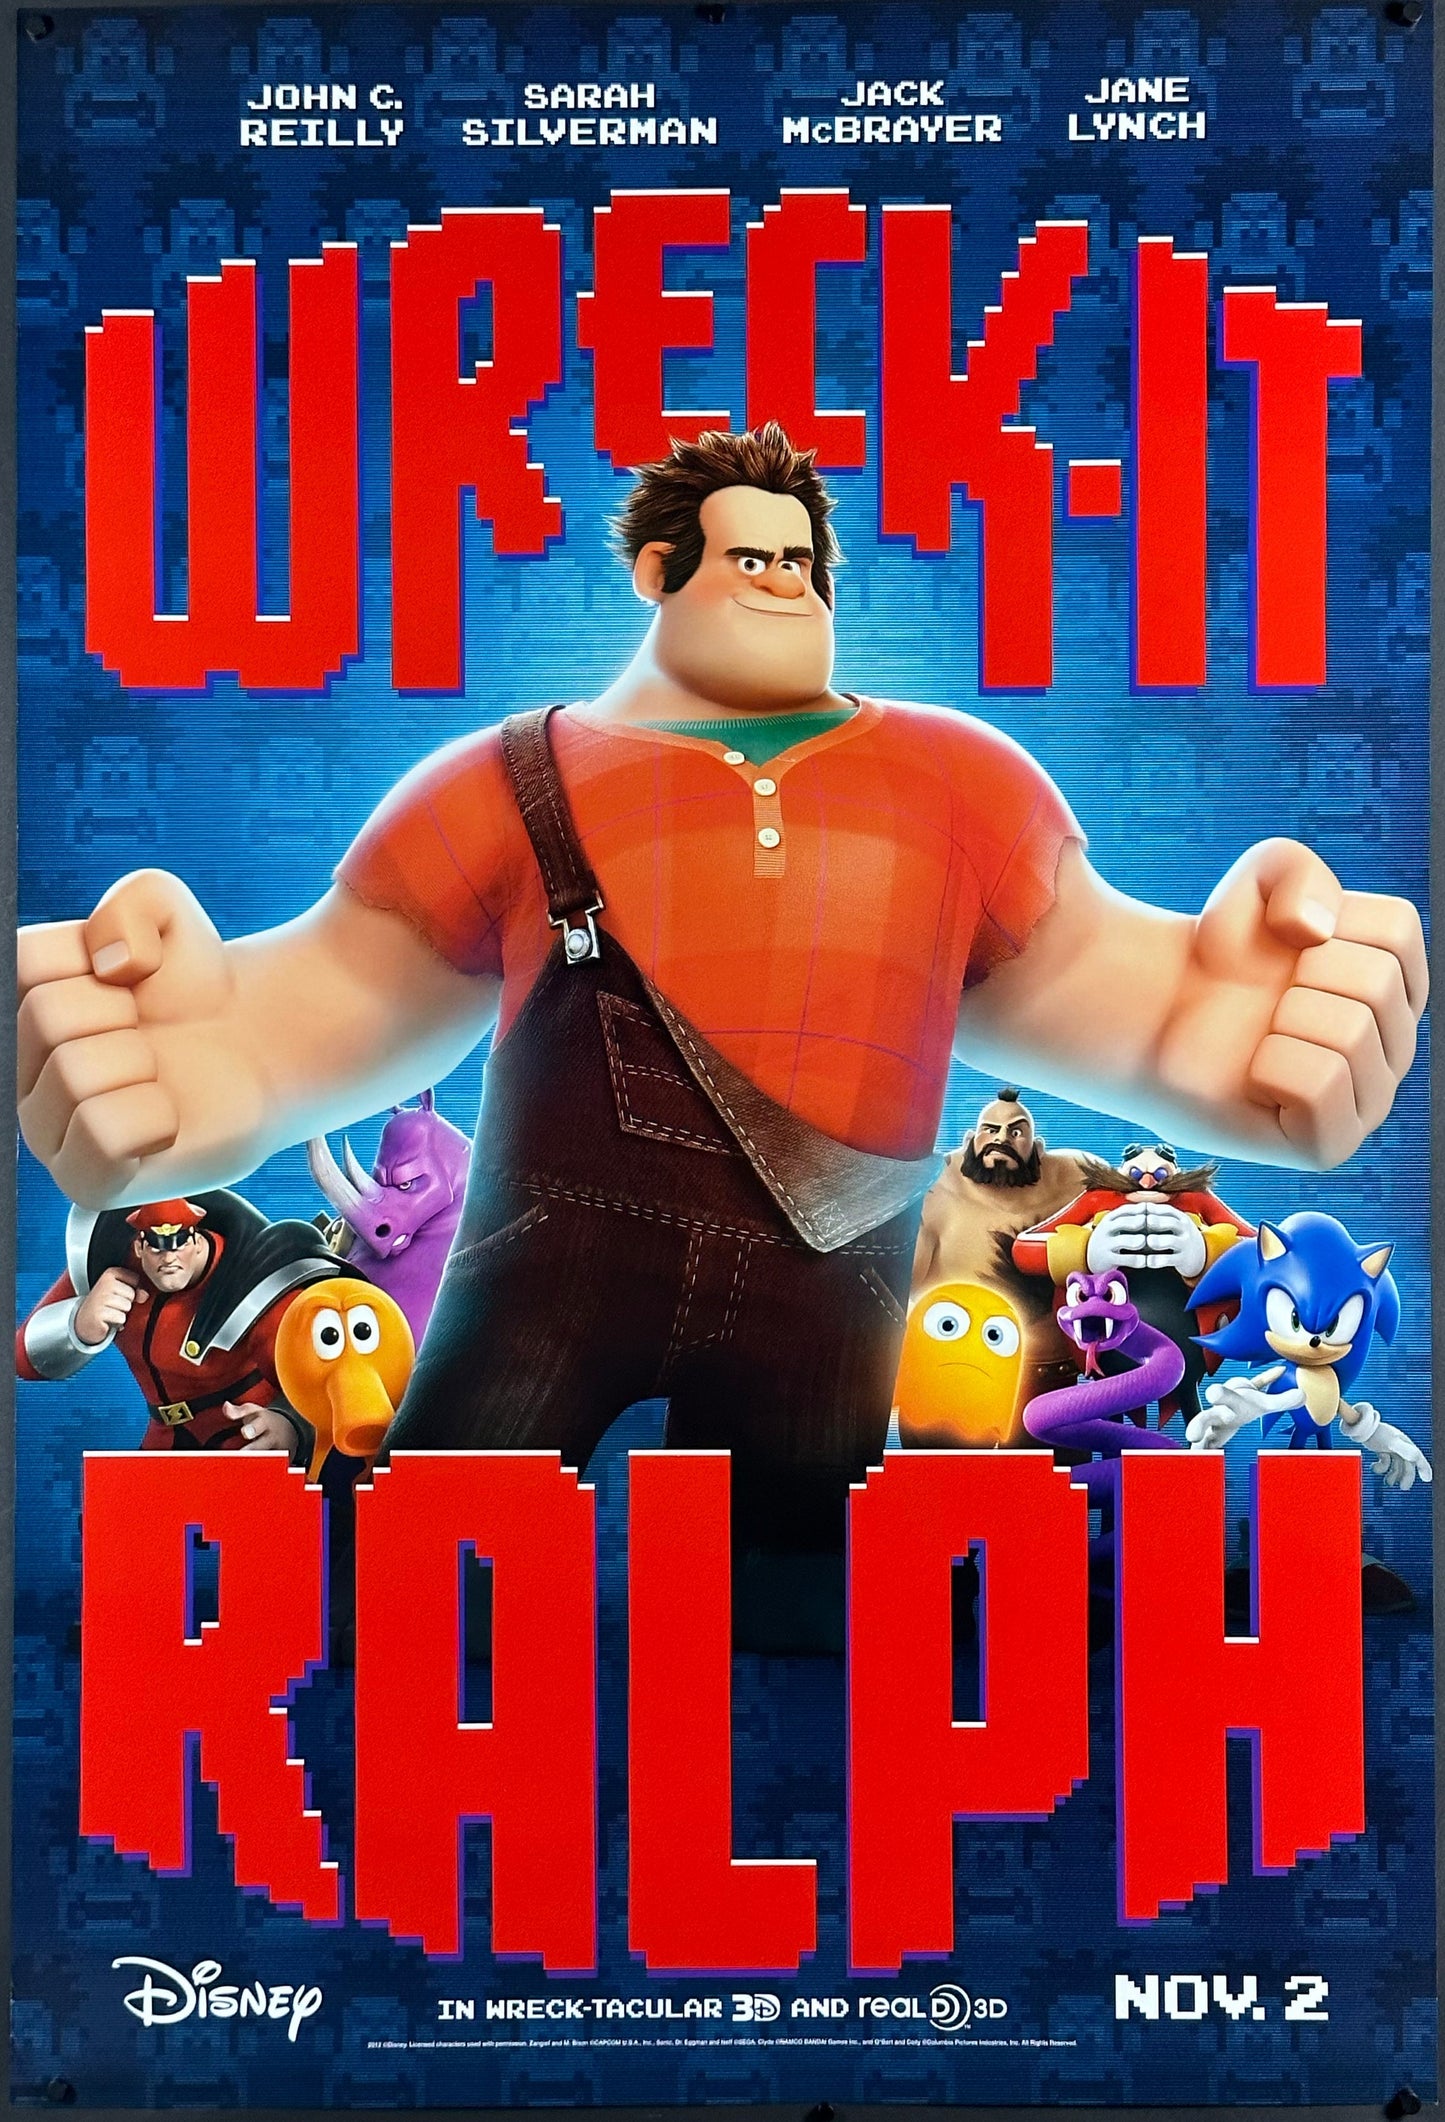 Wreck-It Ralph US One Sheet (2012) - ORIGINAL RELEASE - posterpalace.com